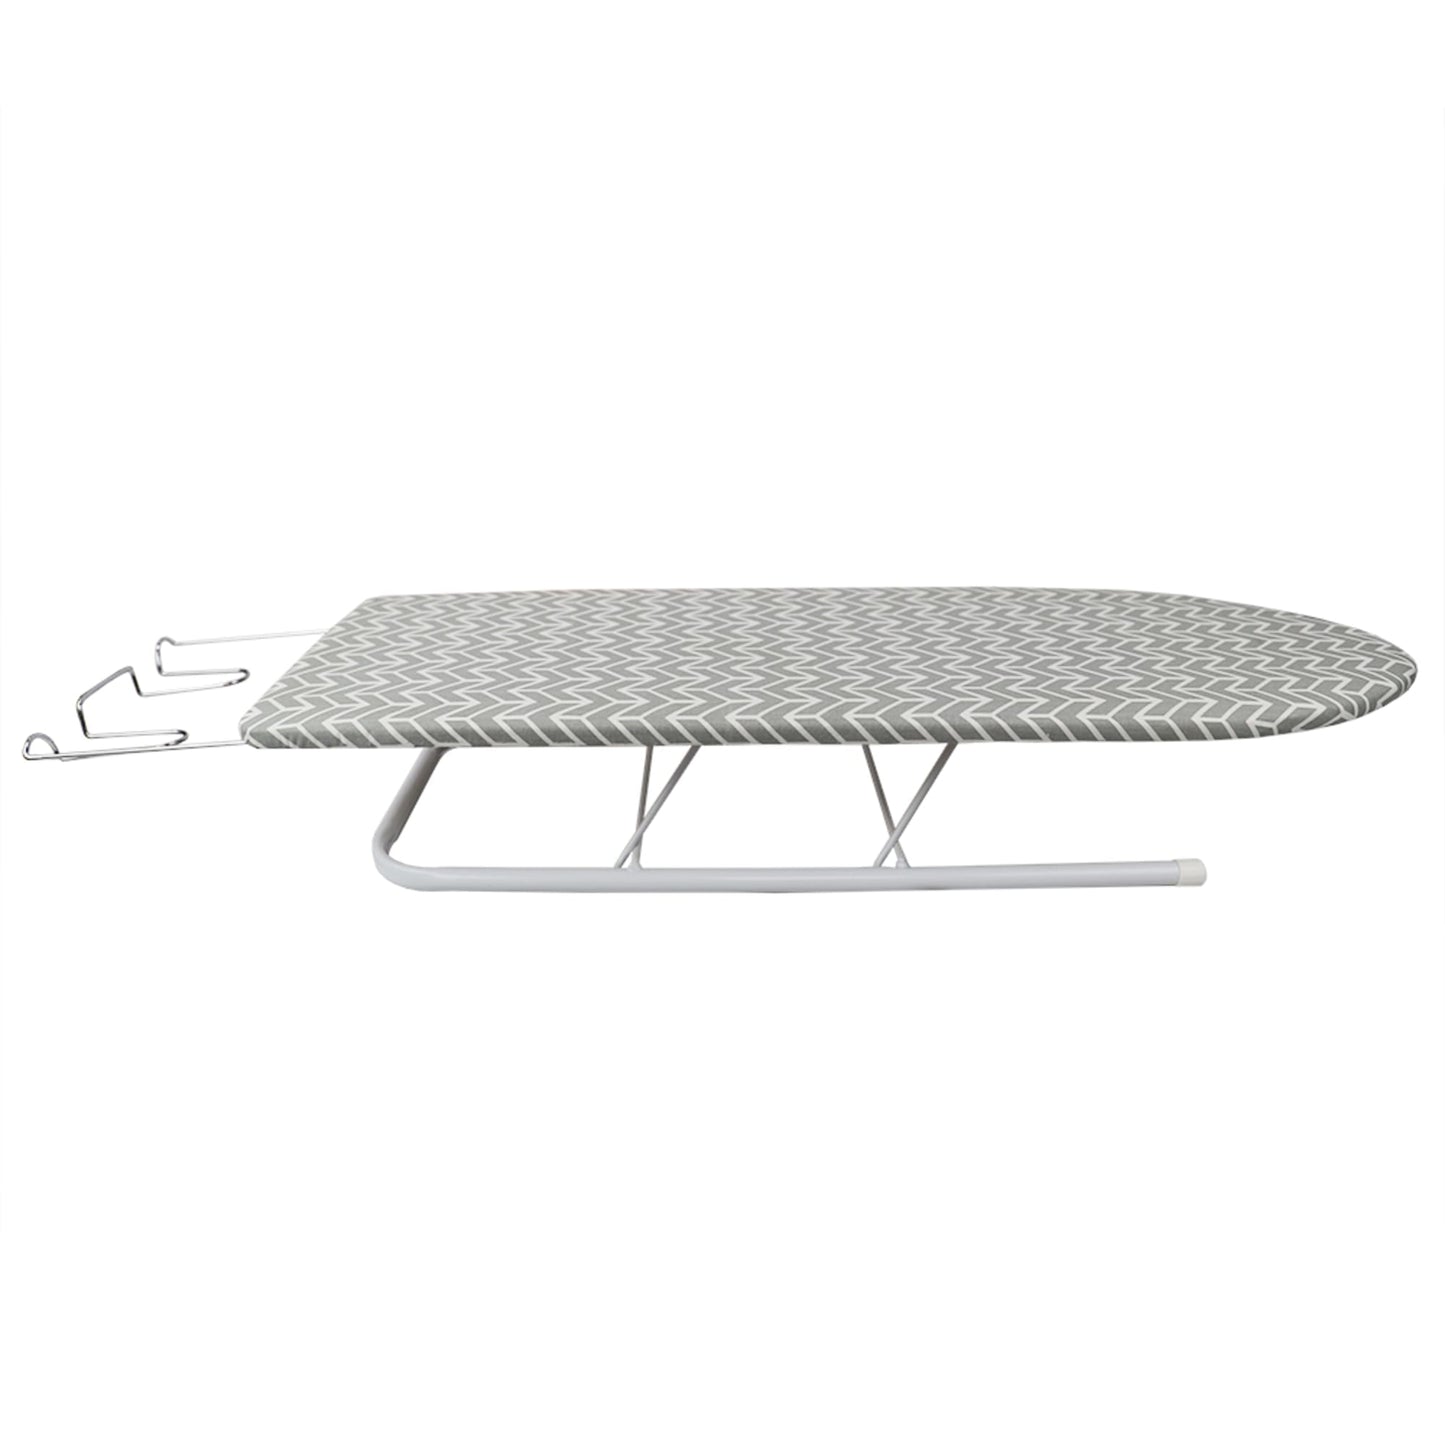 Tabletop Ironing Board with Rest and Cover